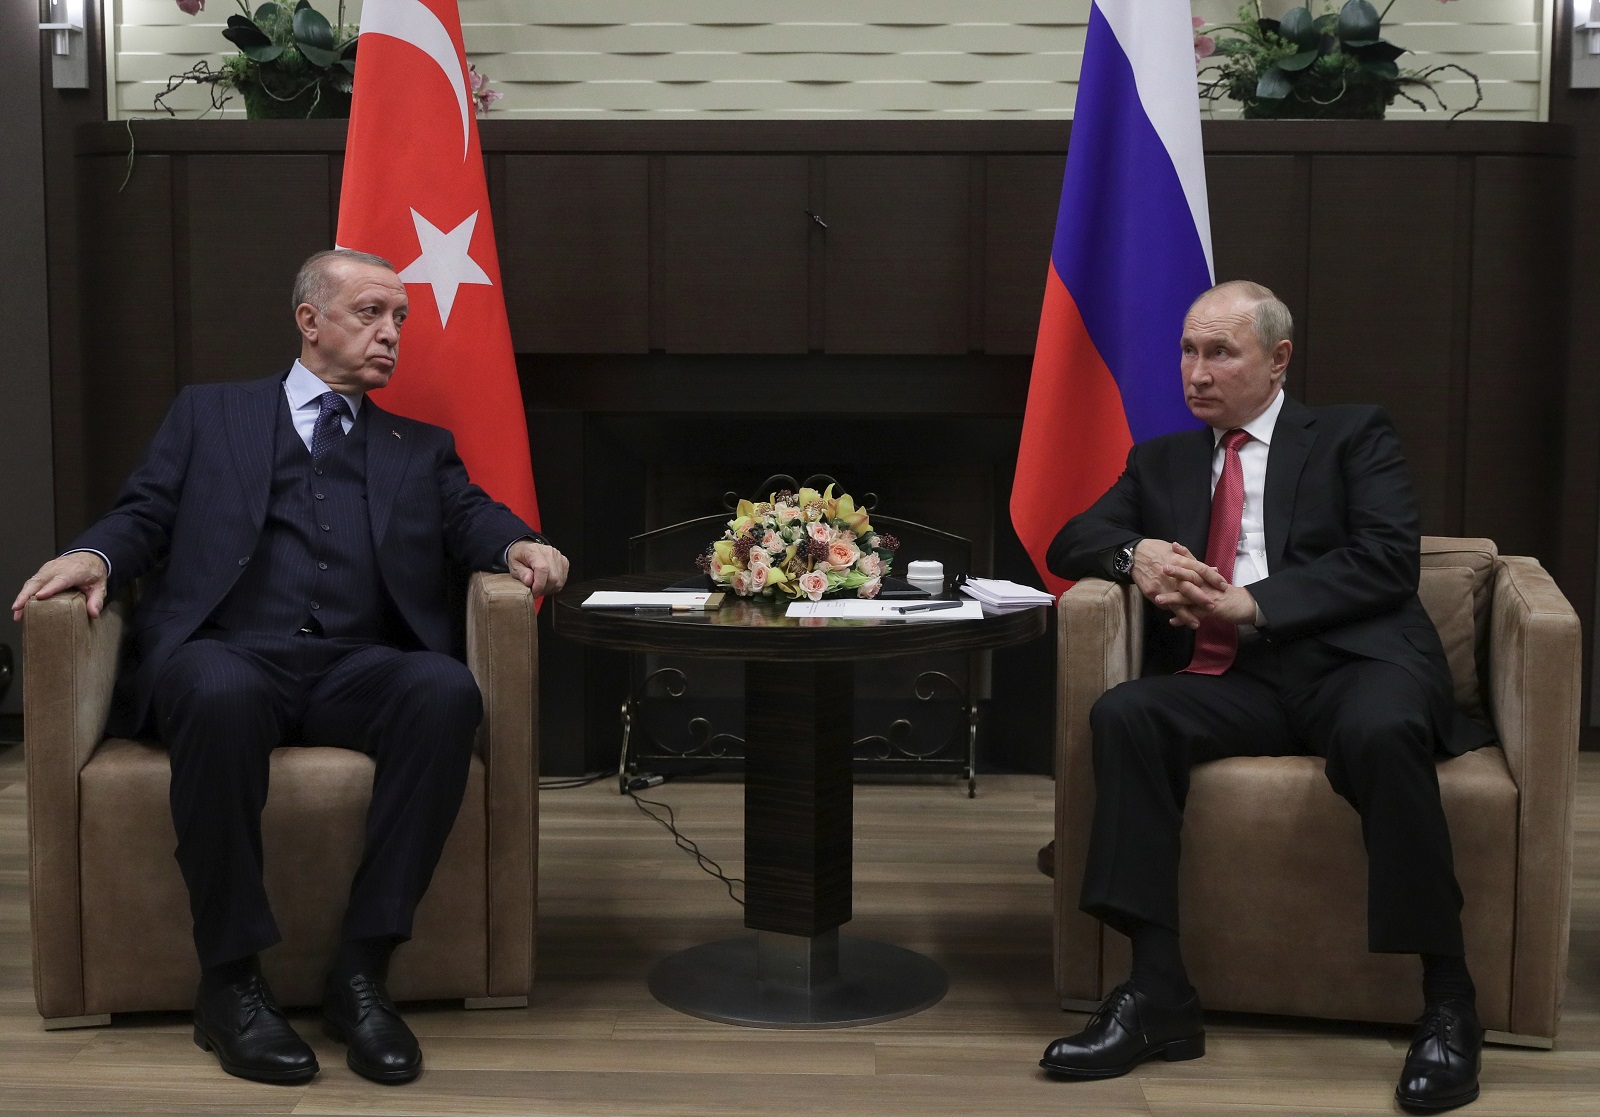 epa09495223 Russian President Vladimir Putin (R) speaks with Turkish President Recep Tayyip Erdogan during their meeting at the Bocharov Ruchei residence in Sochi, Russia, 28 September 2021. According to Vladimir Putin, Russia and Turkey have not already compensated for all the losses in trade during the pandemic year and even increased it. The Russian President noted the successful cooperation of the two countries in Syria and Libya. Also, according to him, Turkey's influence on the situation contributes to reconciliation in Karabakh.  EPA/VLADIMIR SMIRNOV/ SPUTNIK / KREMLIN POOL MANDATORY CREDIT